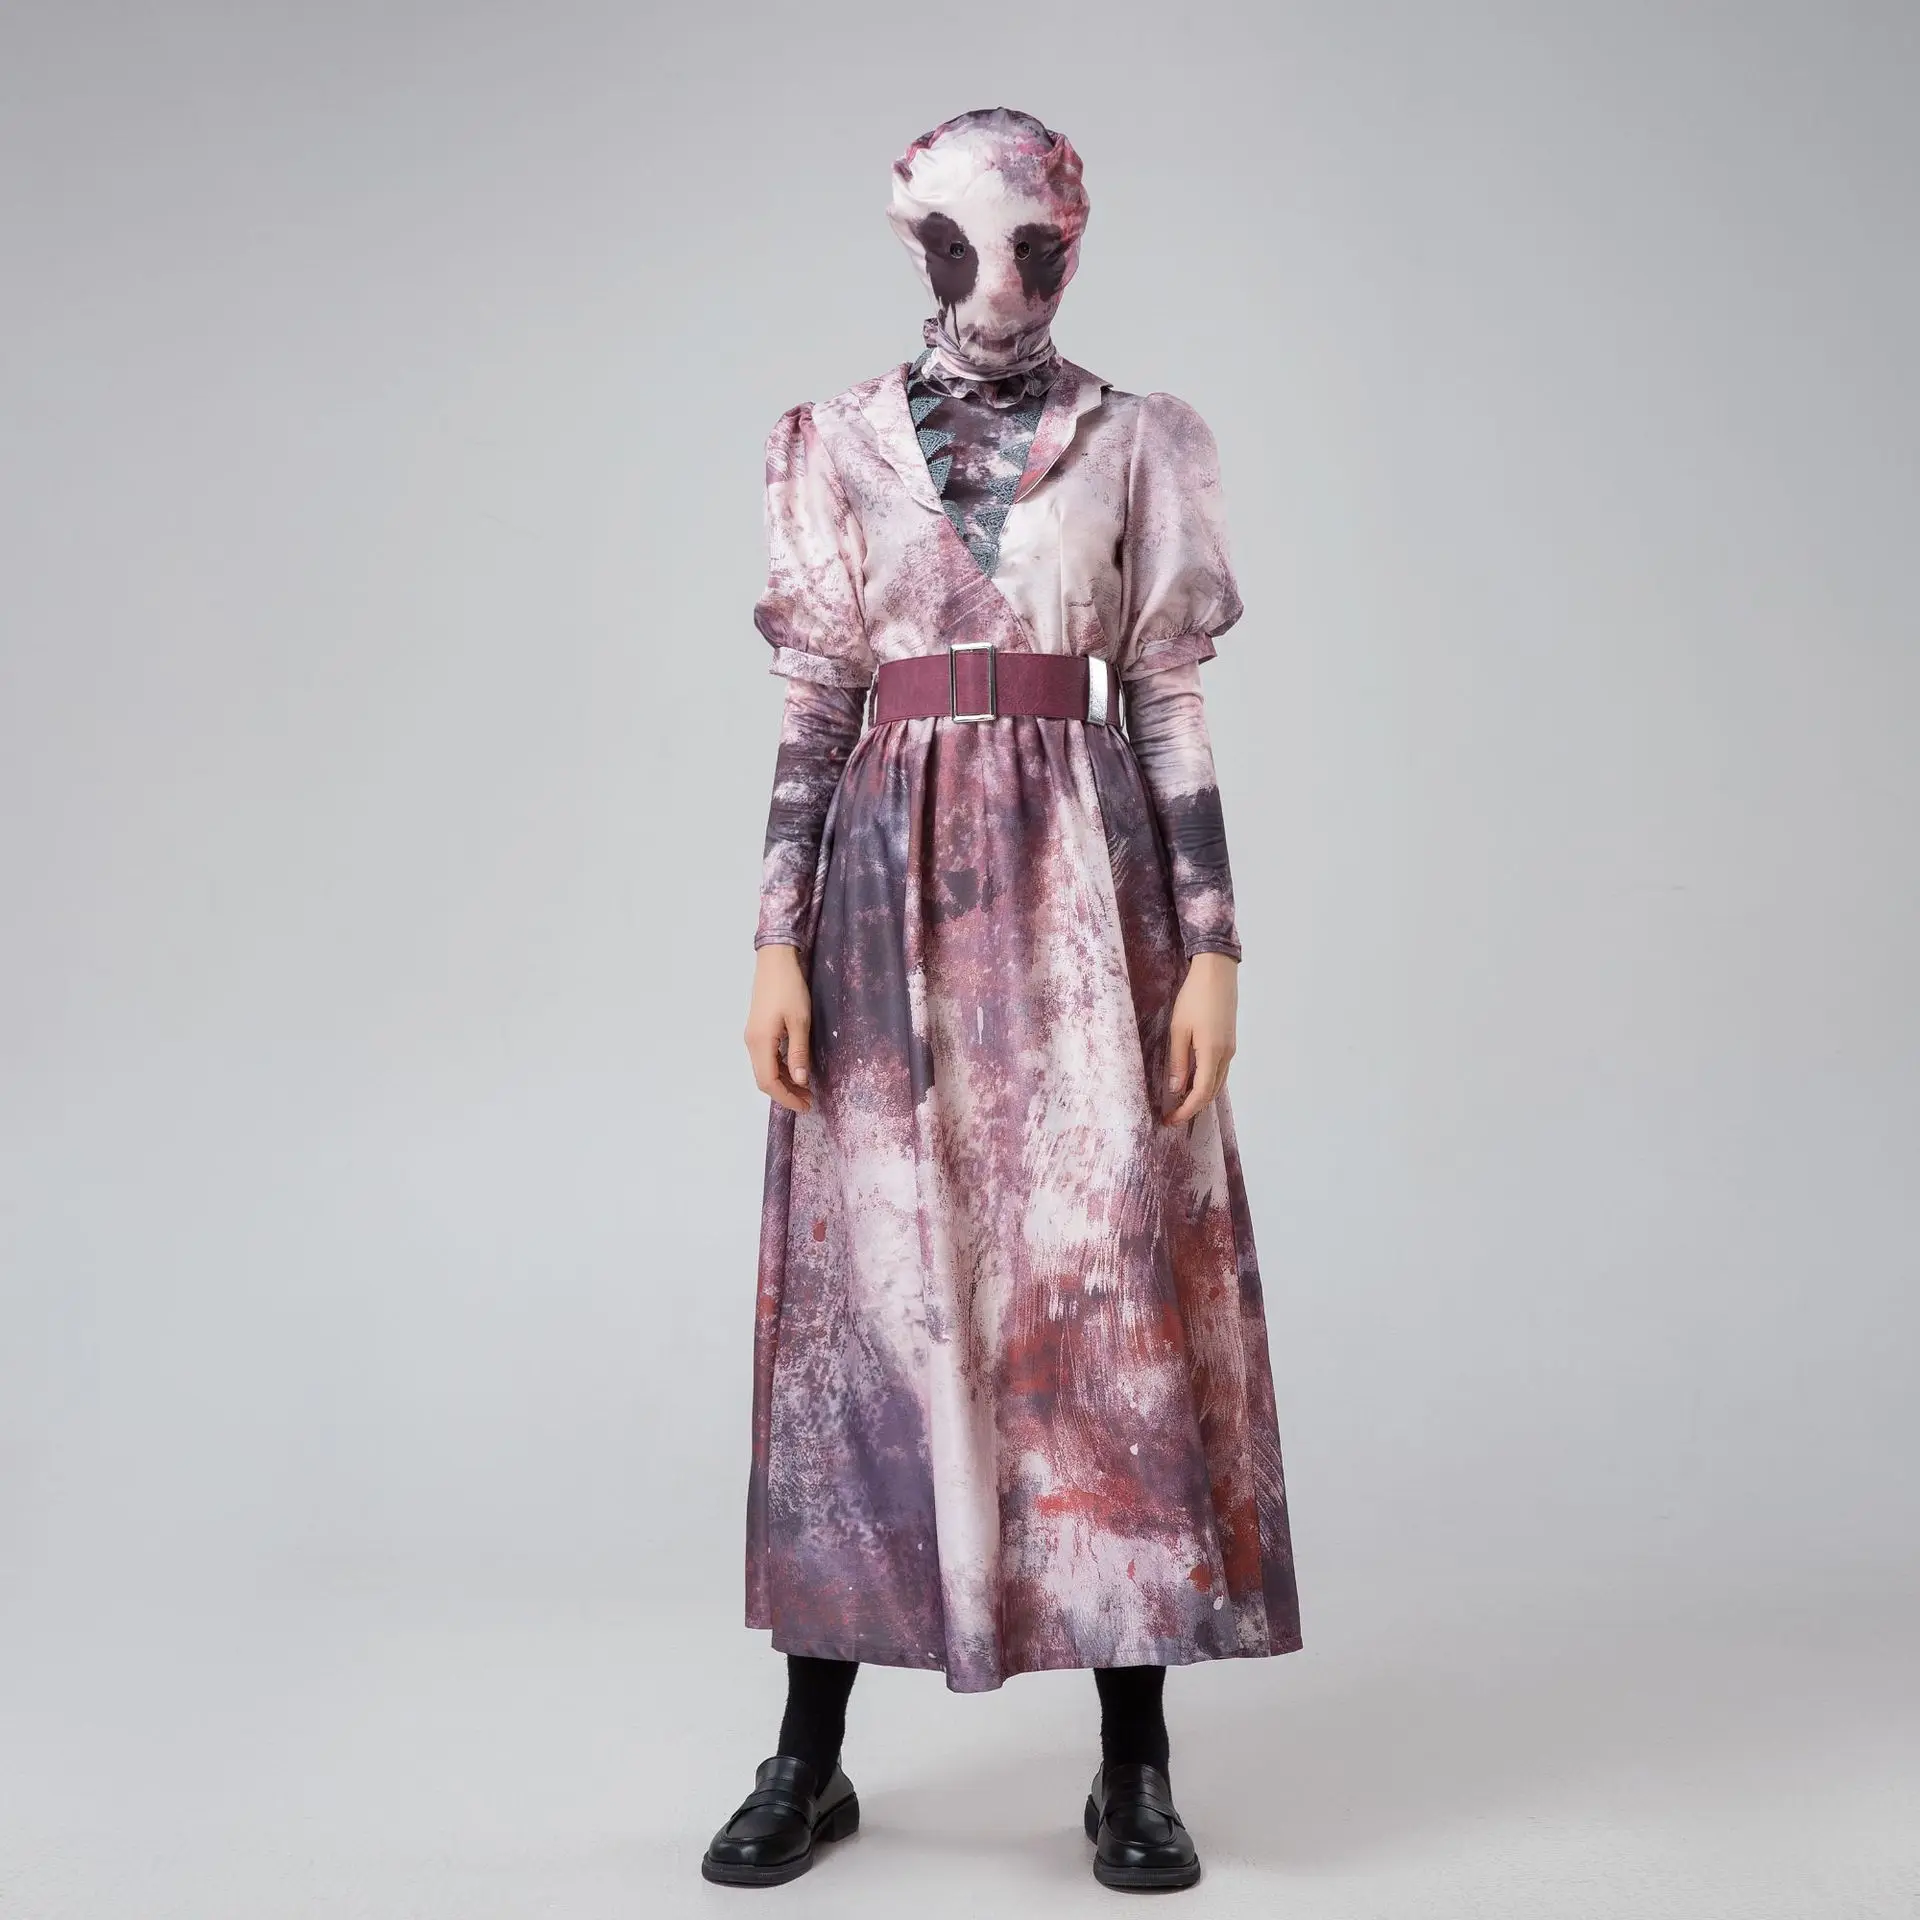 

Game Dead Zombie Daylight Cosplay Dawn of the Dead Dawn Killing Butcher Puff Cos Dress Silent Hill Nurse Mask Halloween Suit